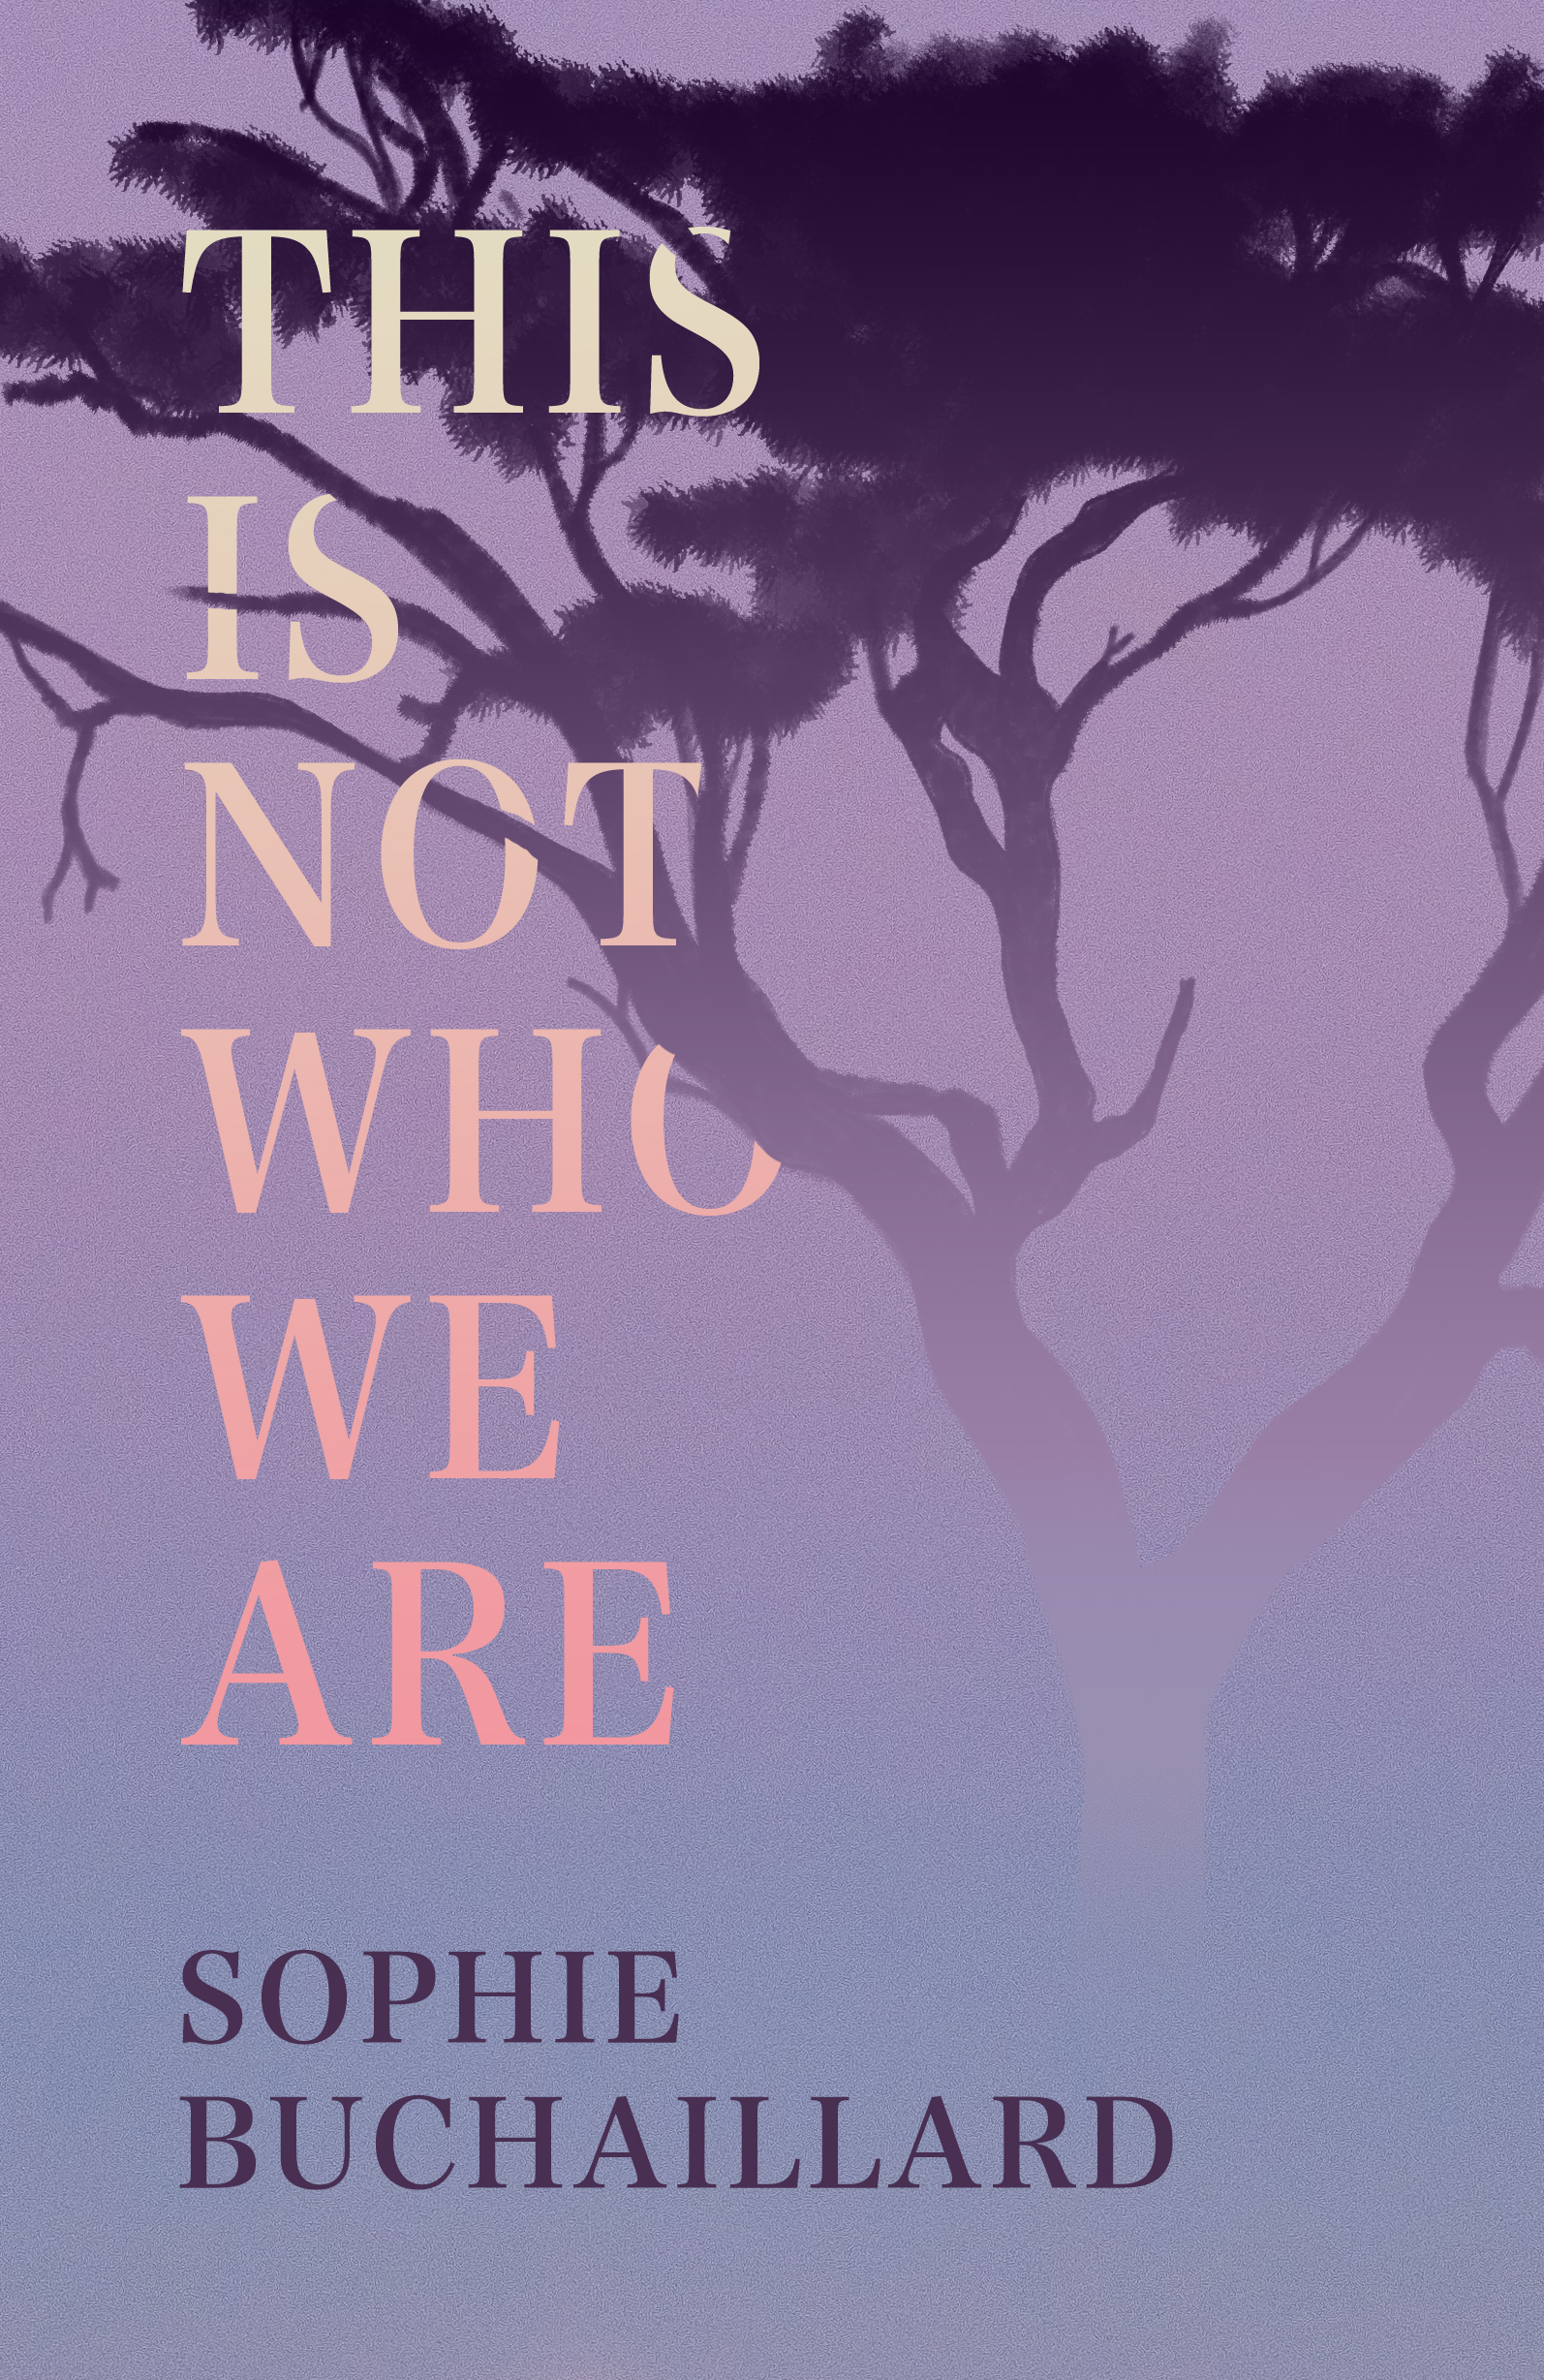 Cover for the novel This Is Not Who We Are